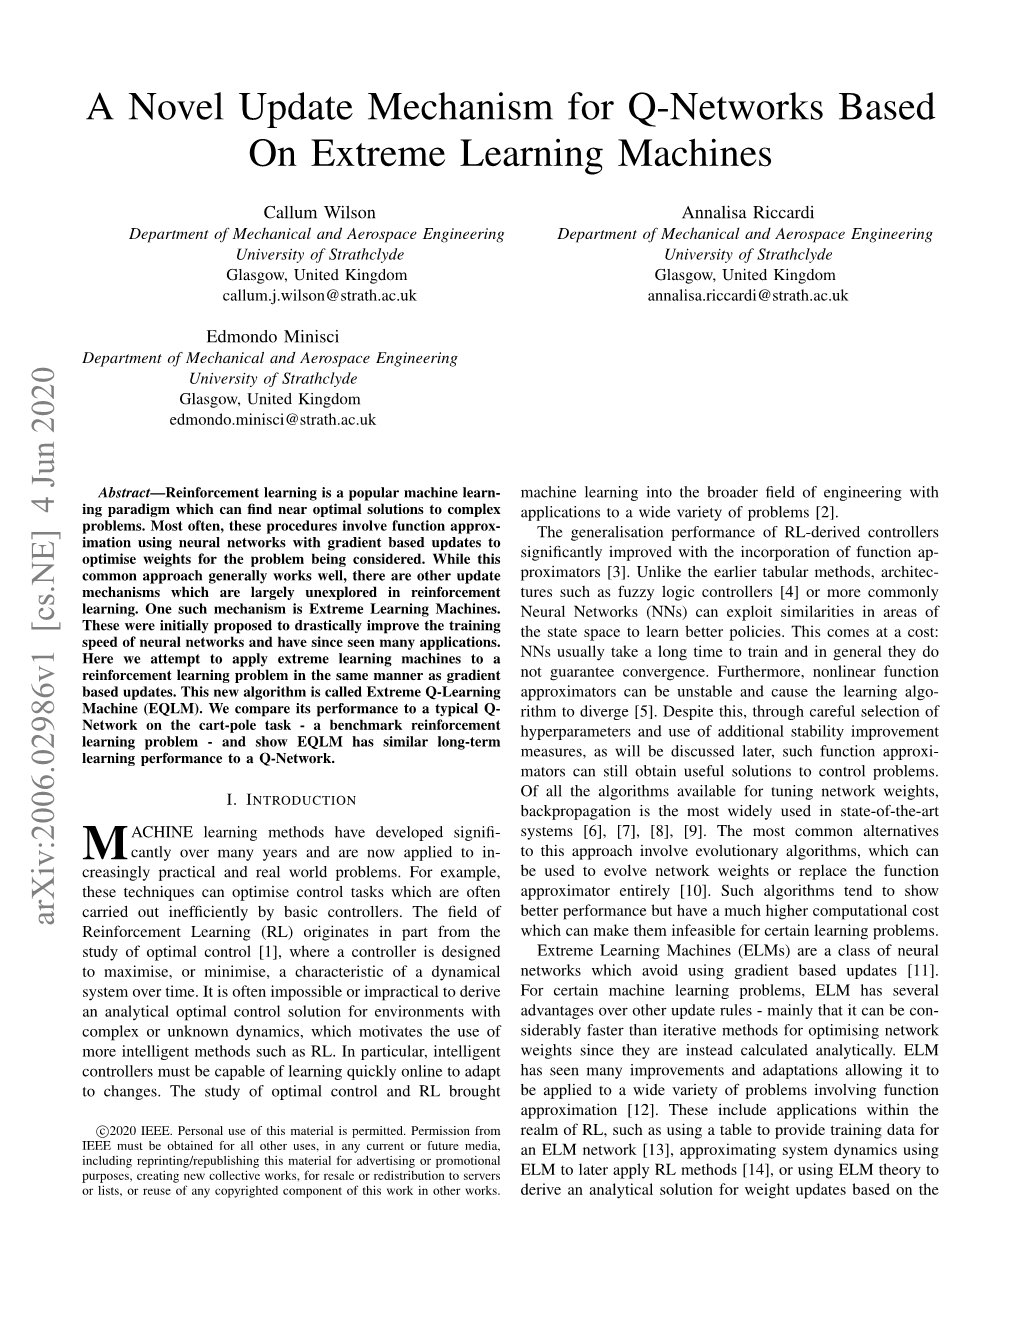 A Novel Update Mechanism for Q-Networks Based on Extreme Learning Machines